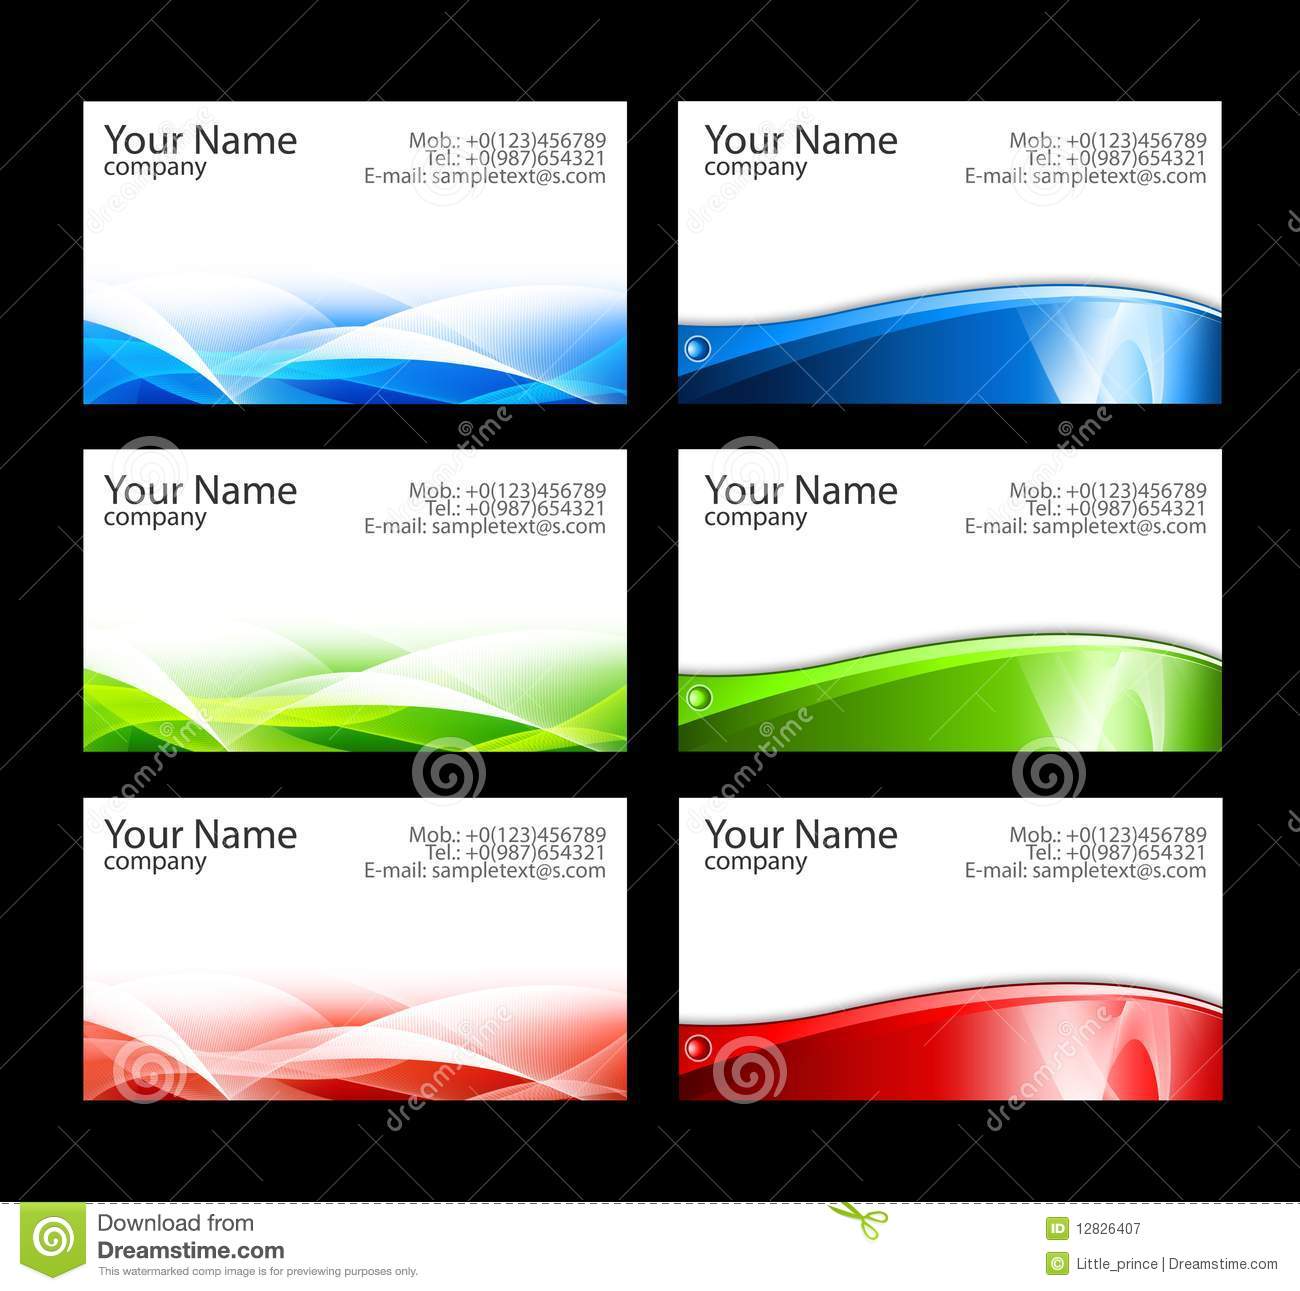 8 Avery Blank Business Card Templates Images Avery Business Cards 